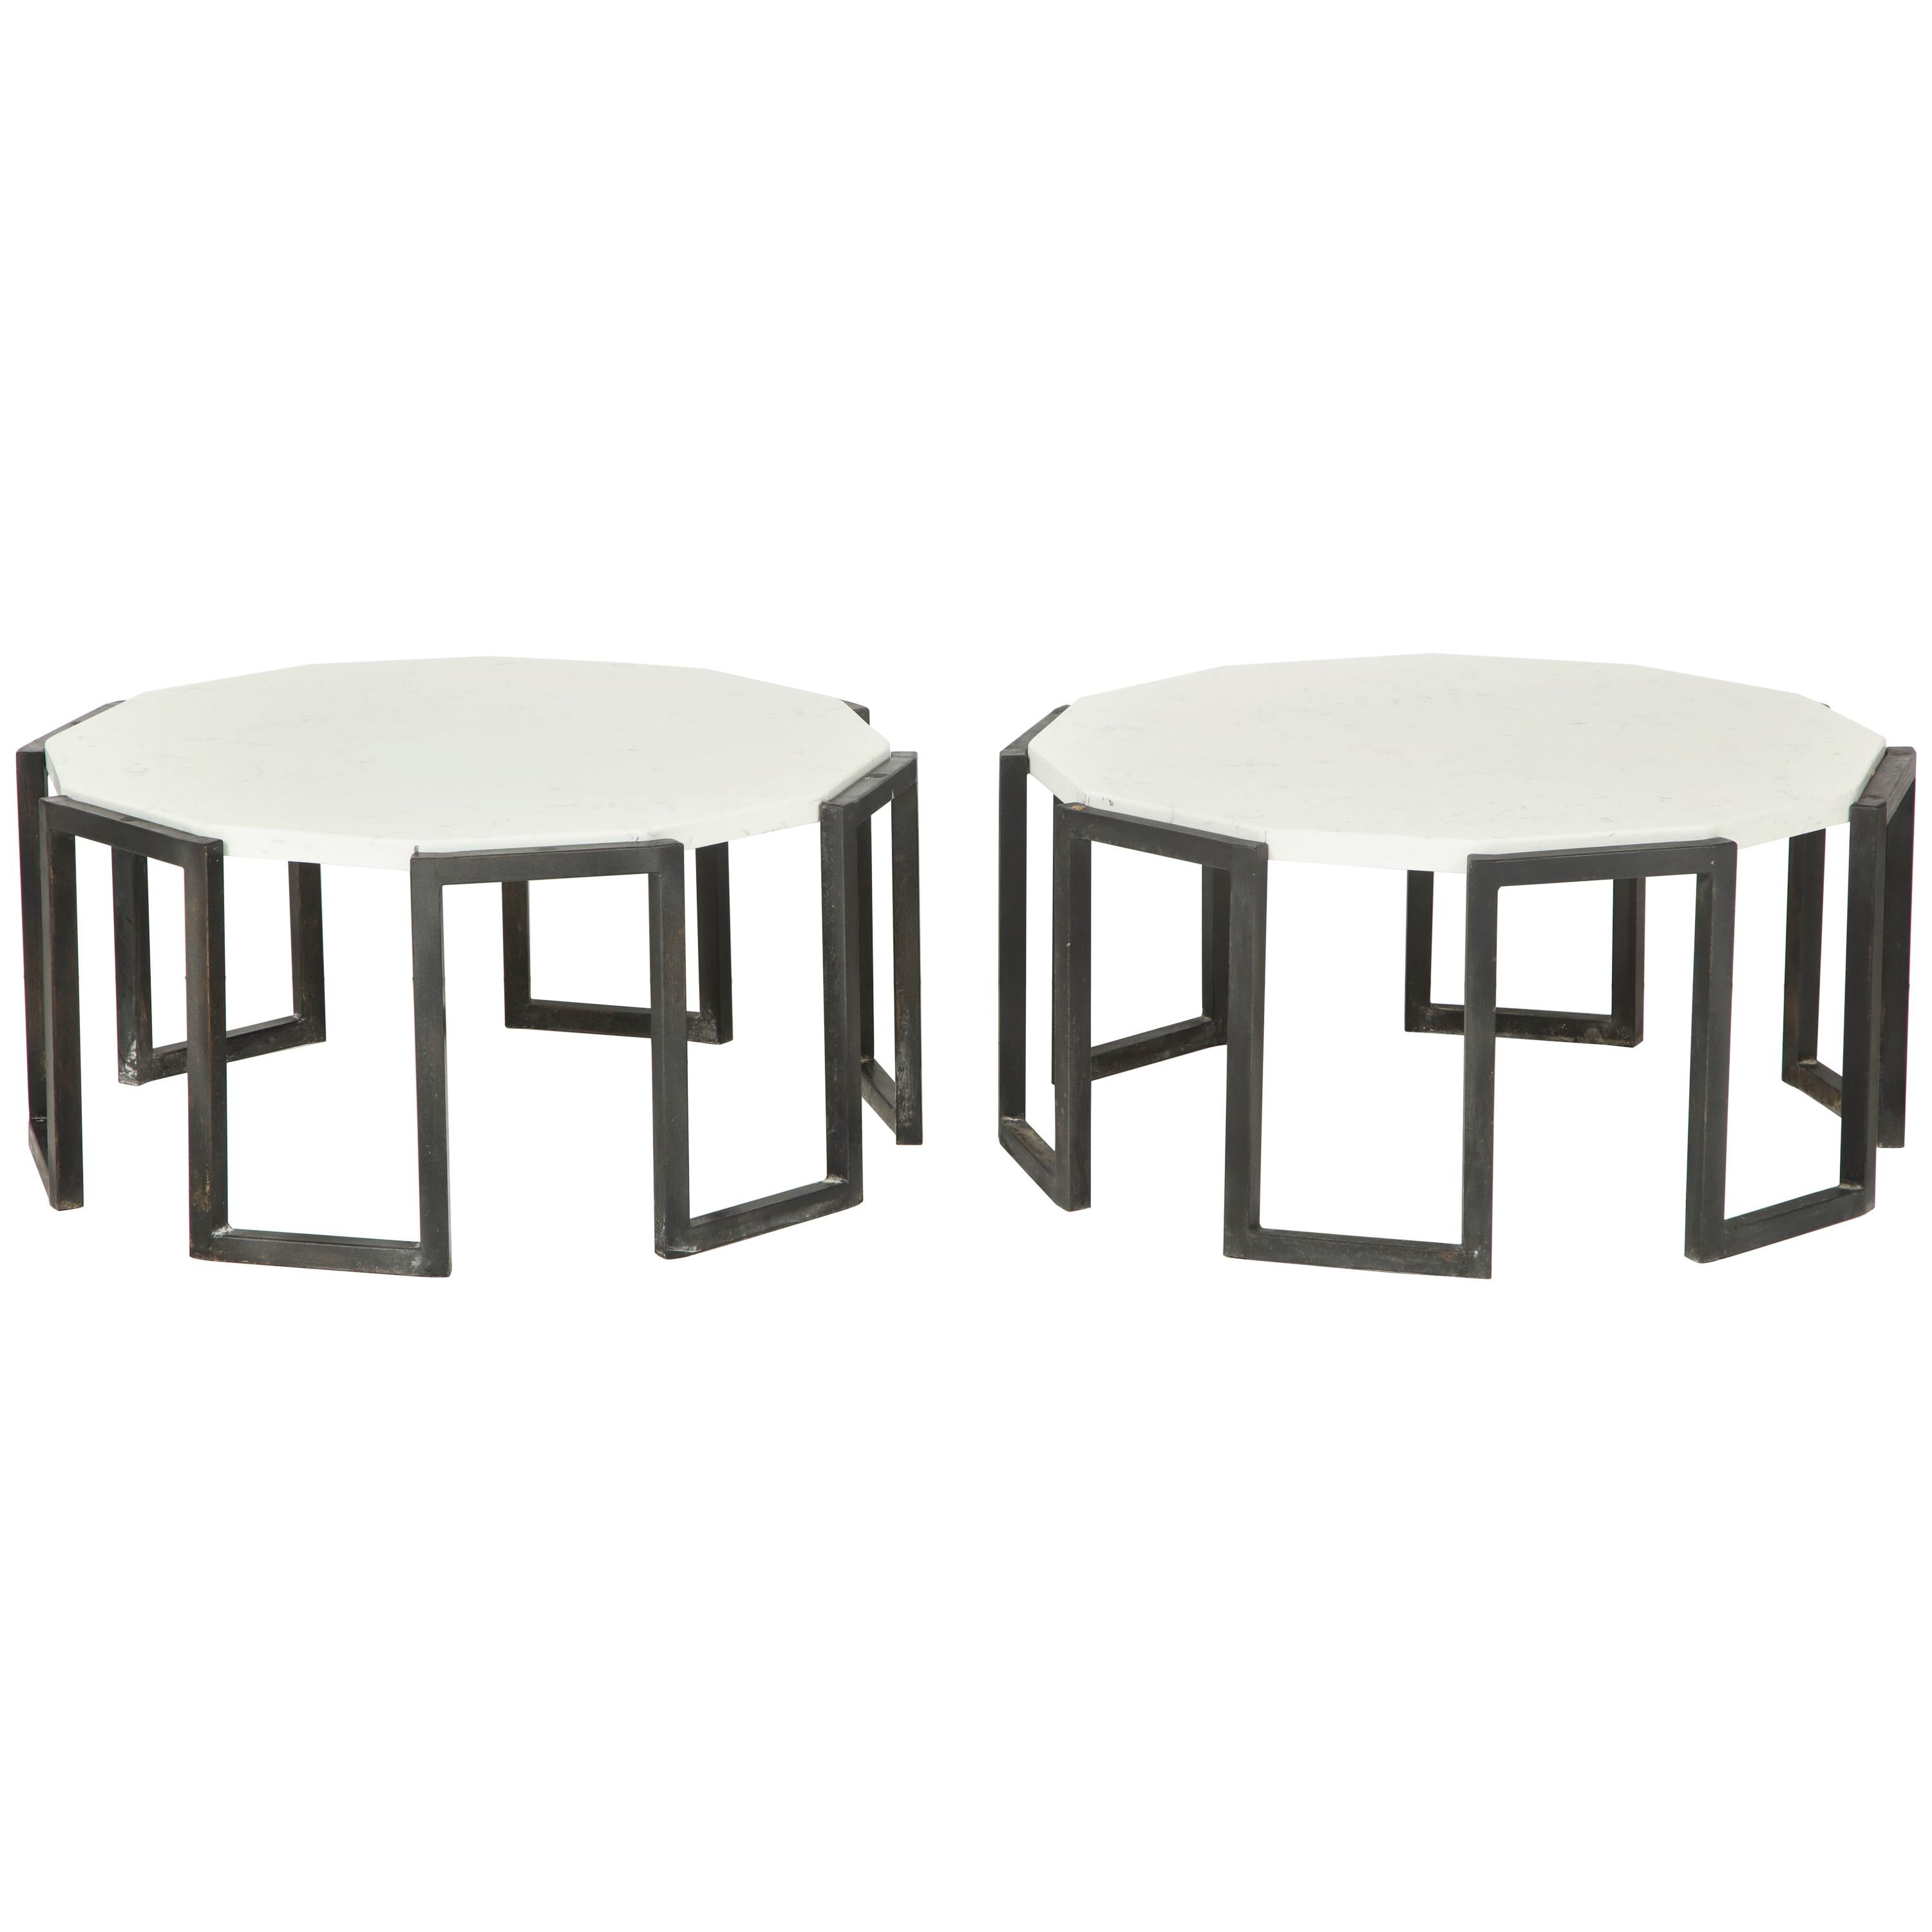 Pair of Wrought Iron and Travertine Marble Tables For Sale